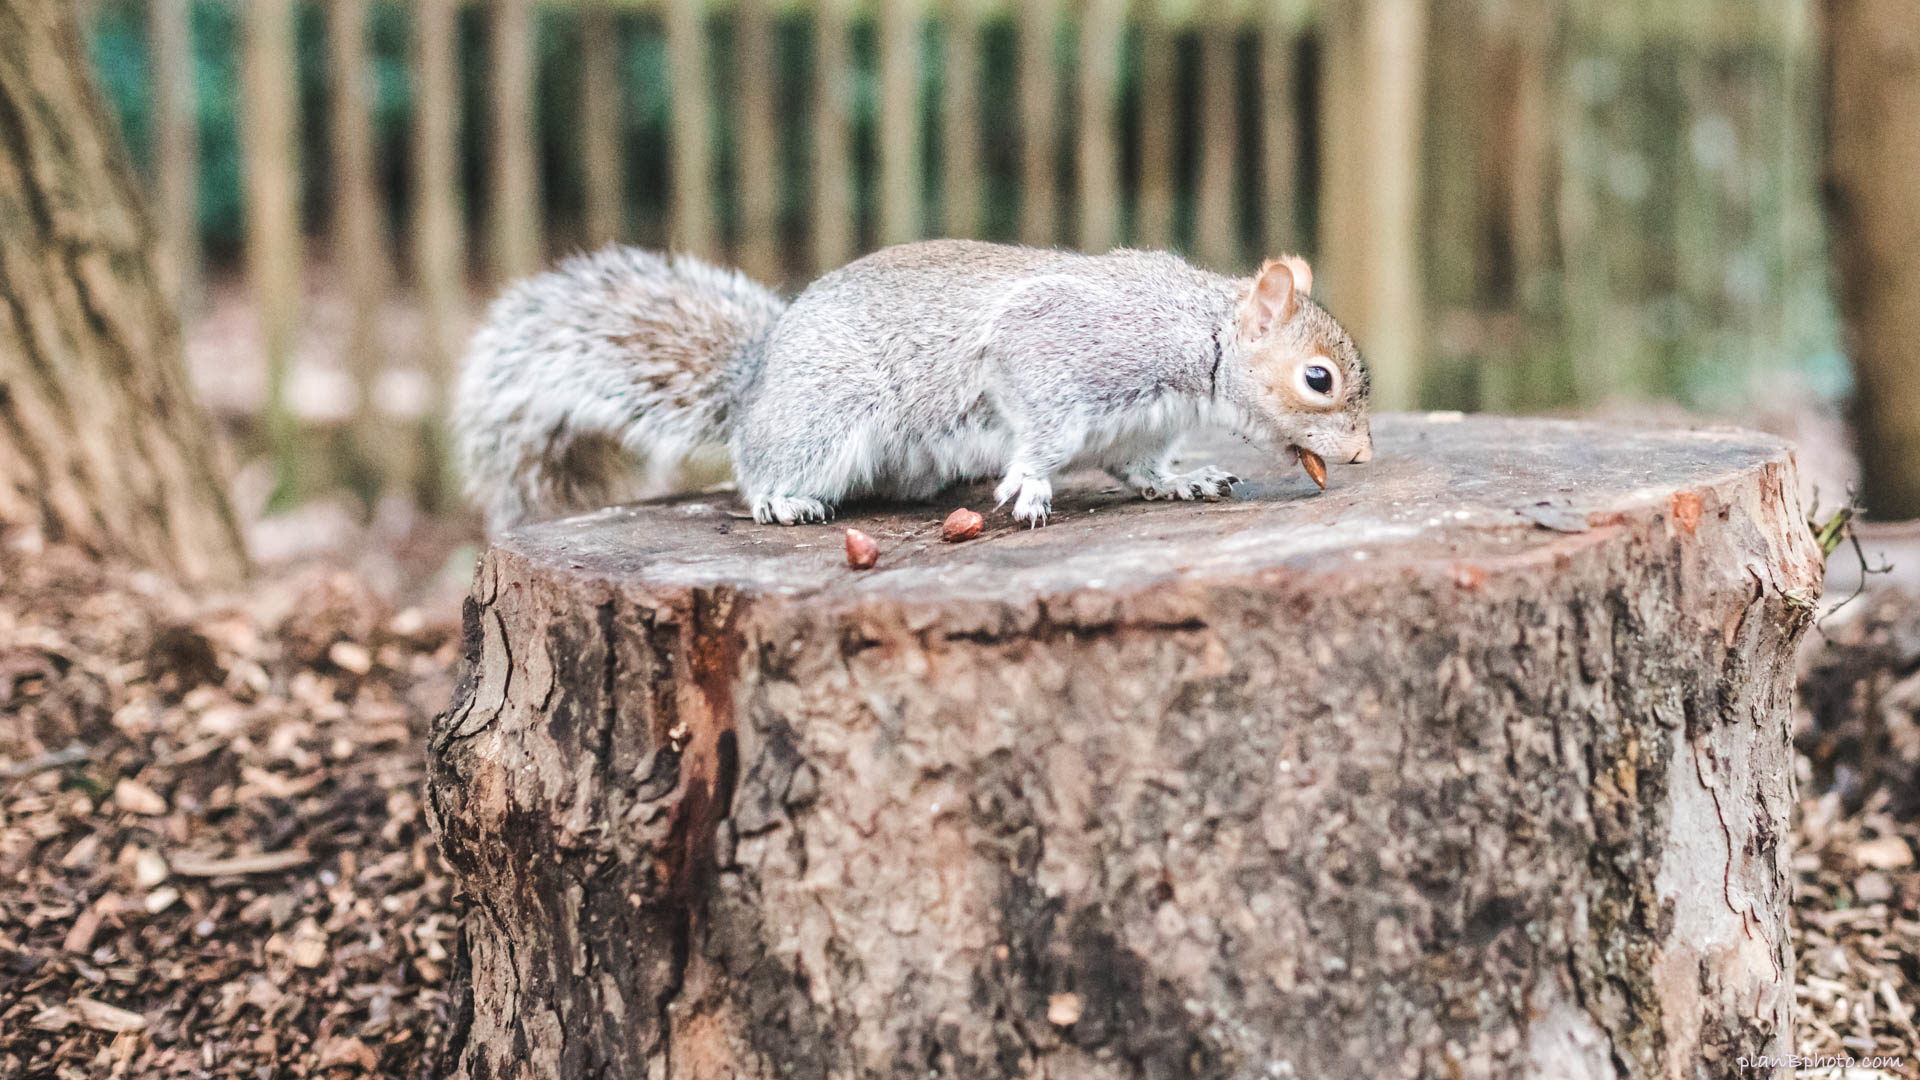 Grey squirrel picking up a nut with its mouth